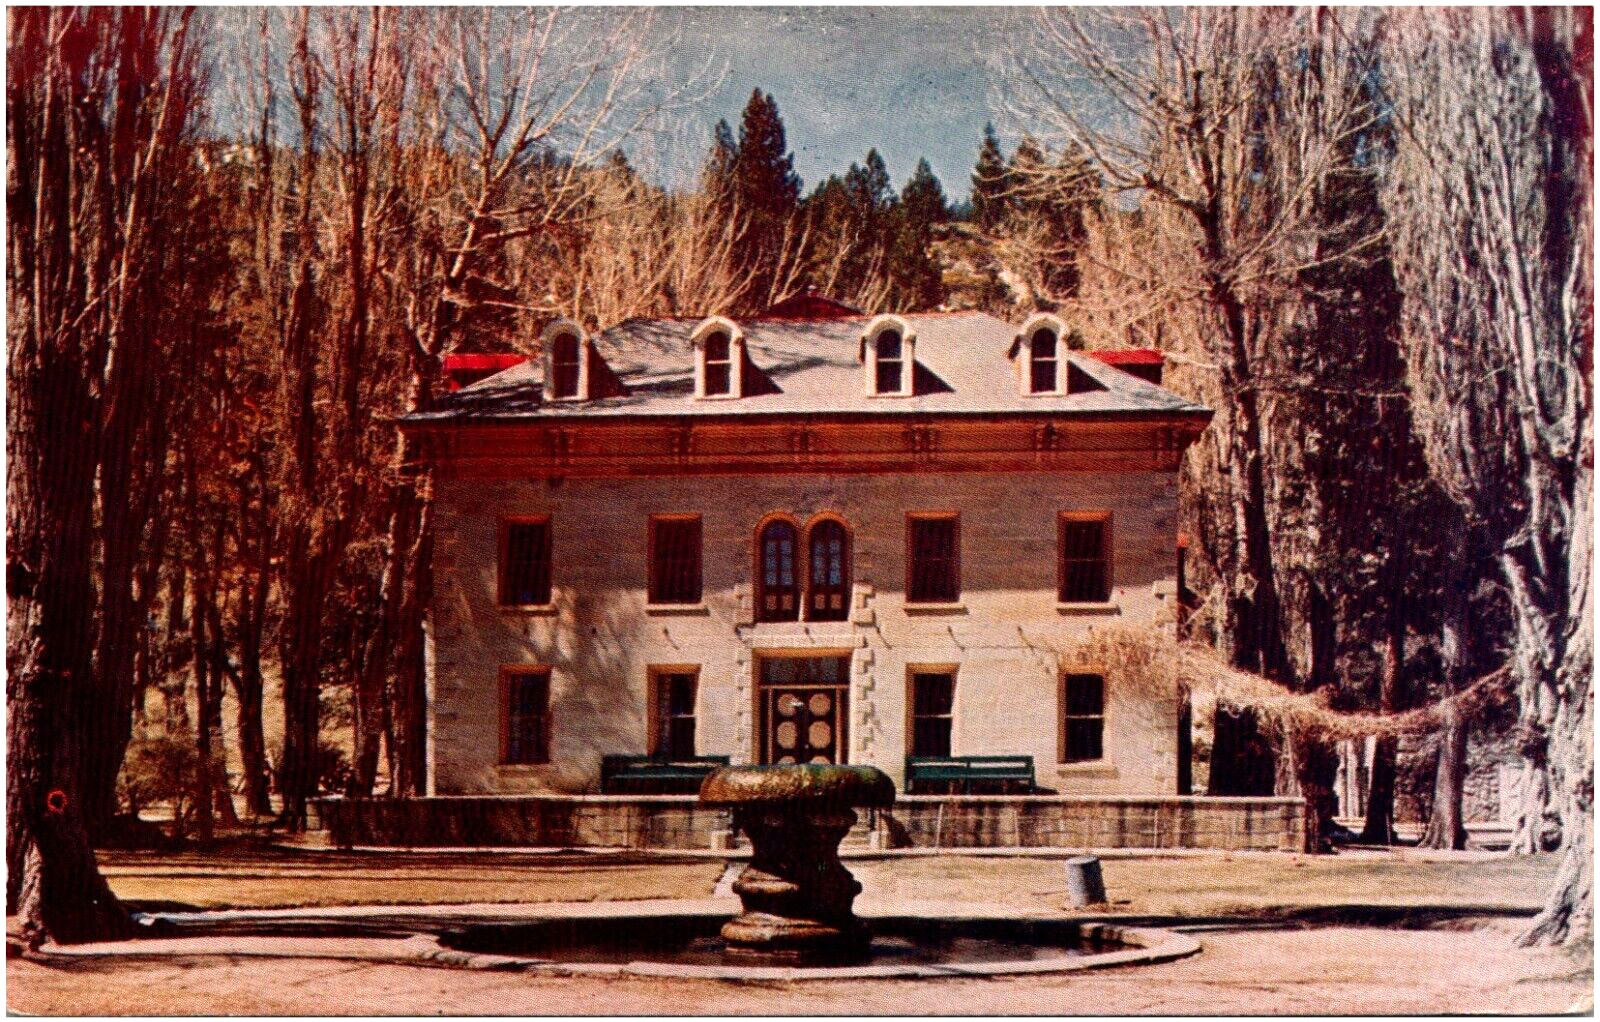 Bowers Mansion on State Highway 3 Nevada Sandy Bowers NV 1950s Chrome Postcard